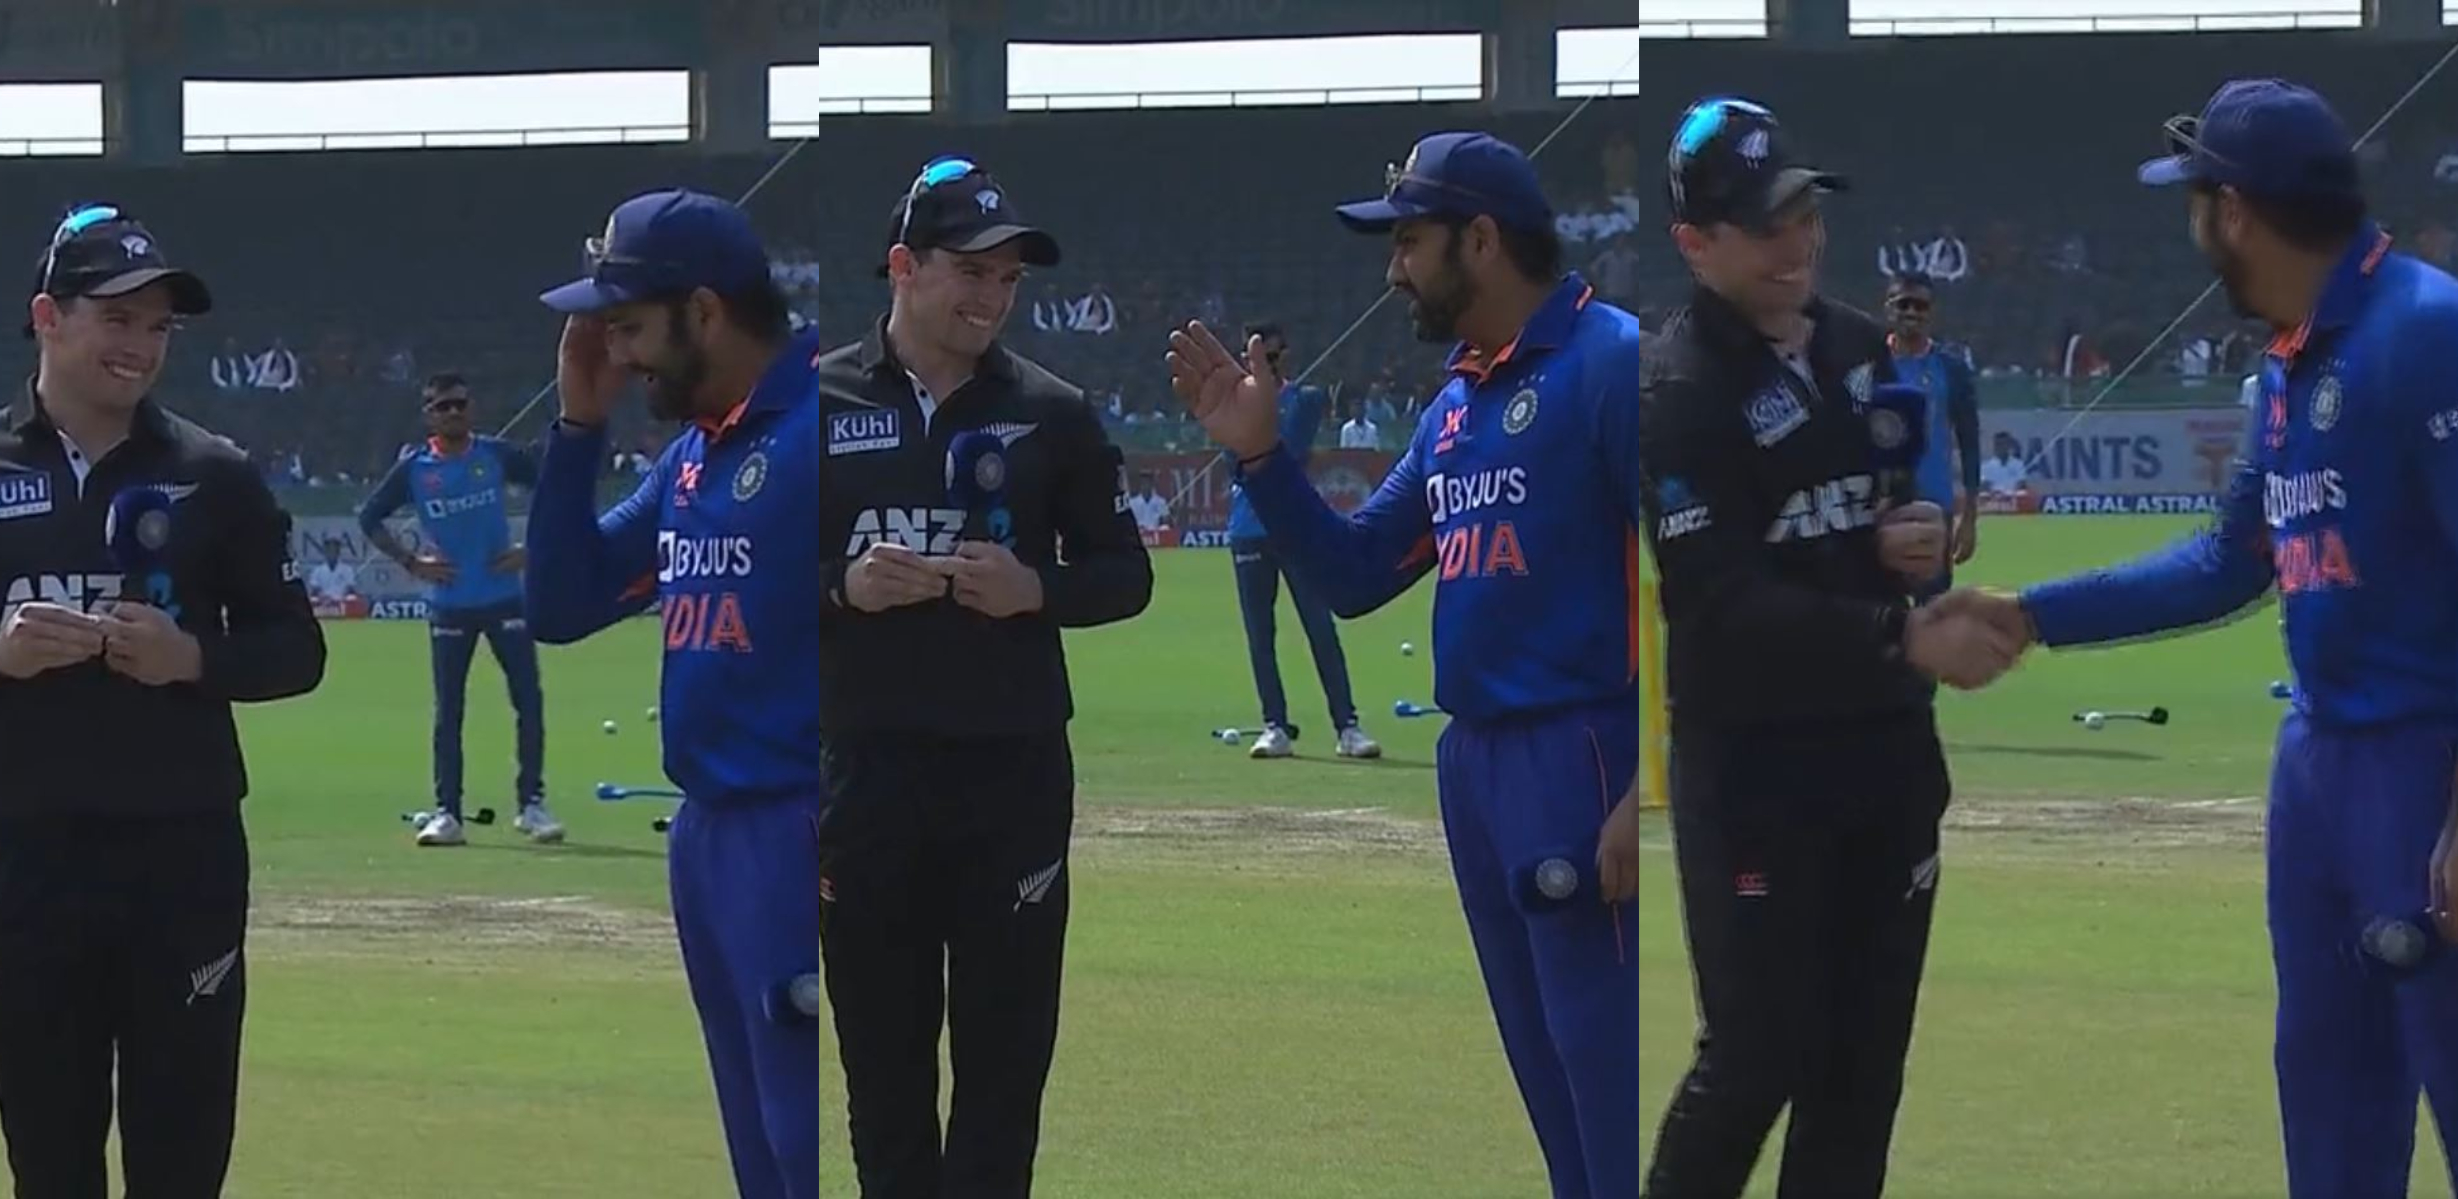 Rohit Sharma seemingly forgot what team decision was after winning the toss | BCCI